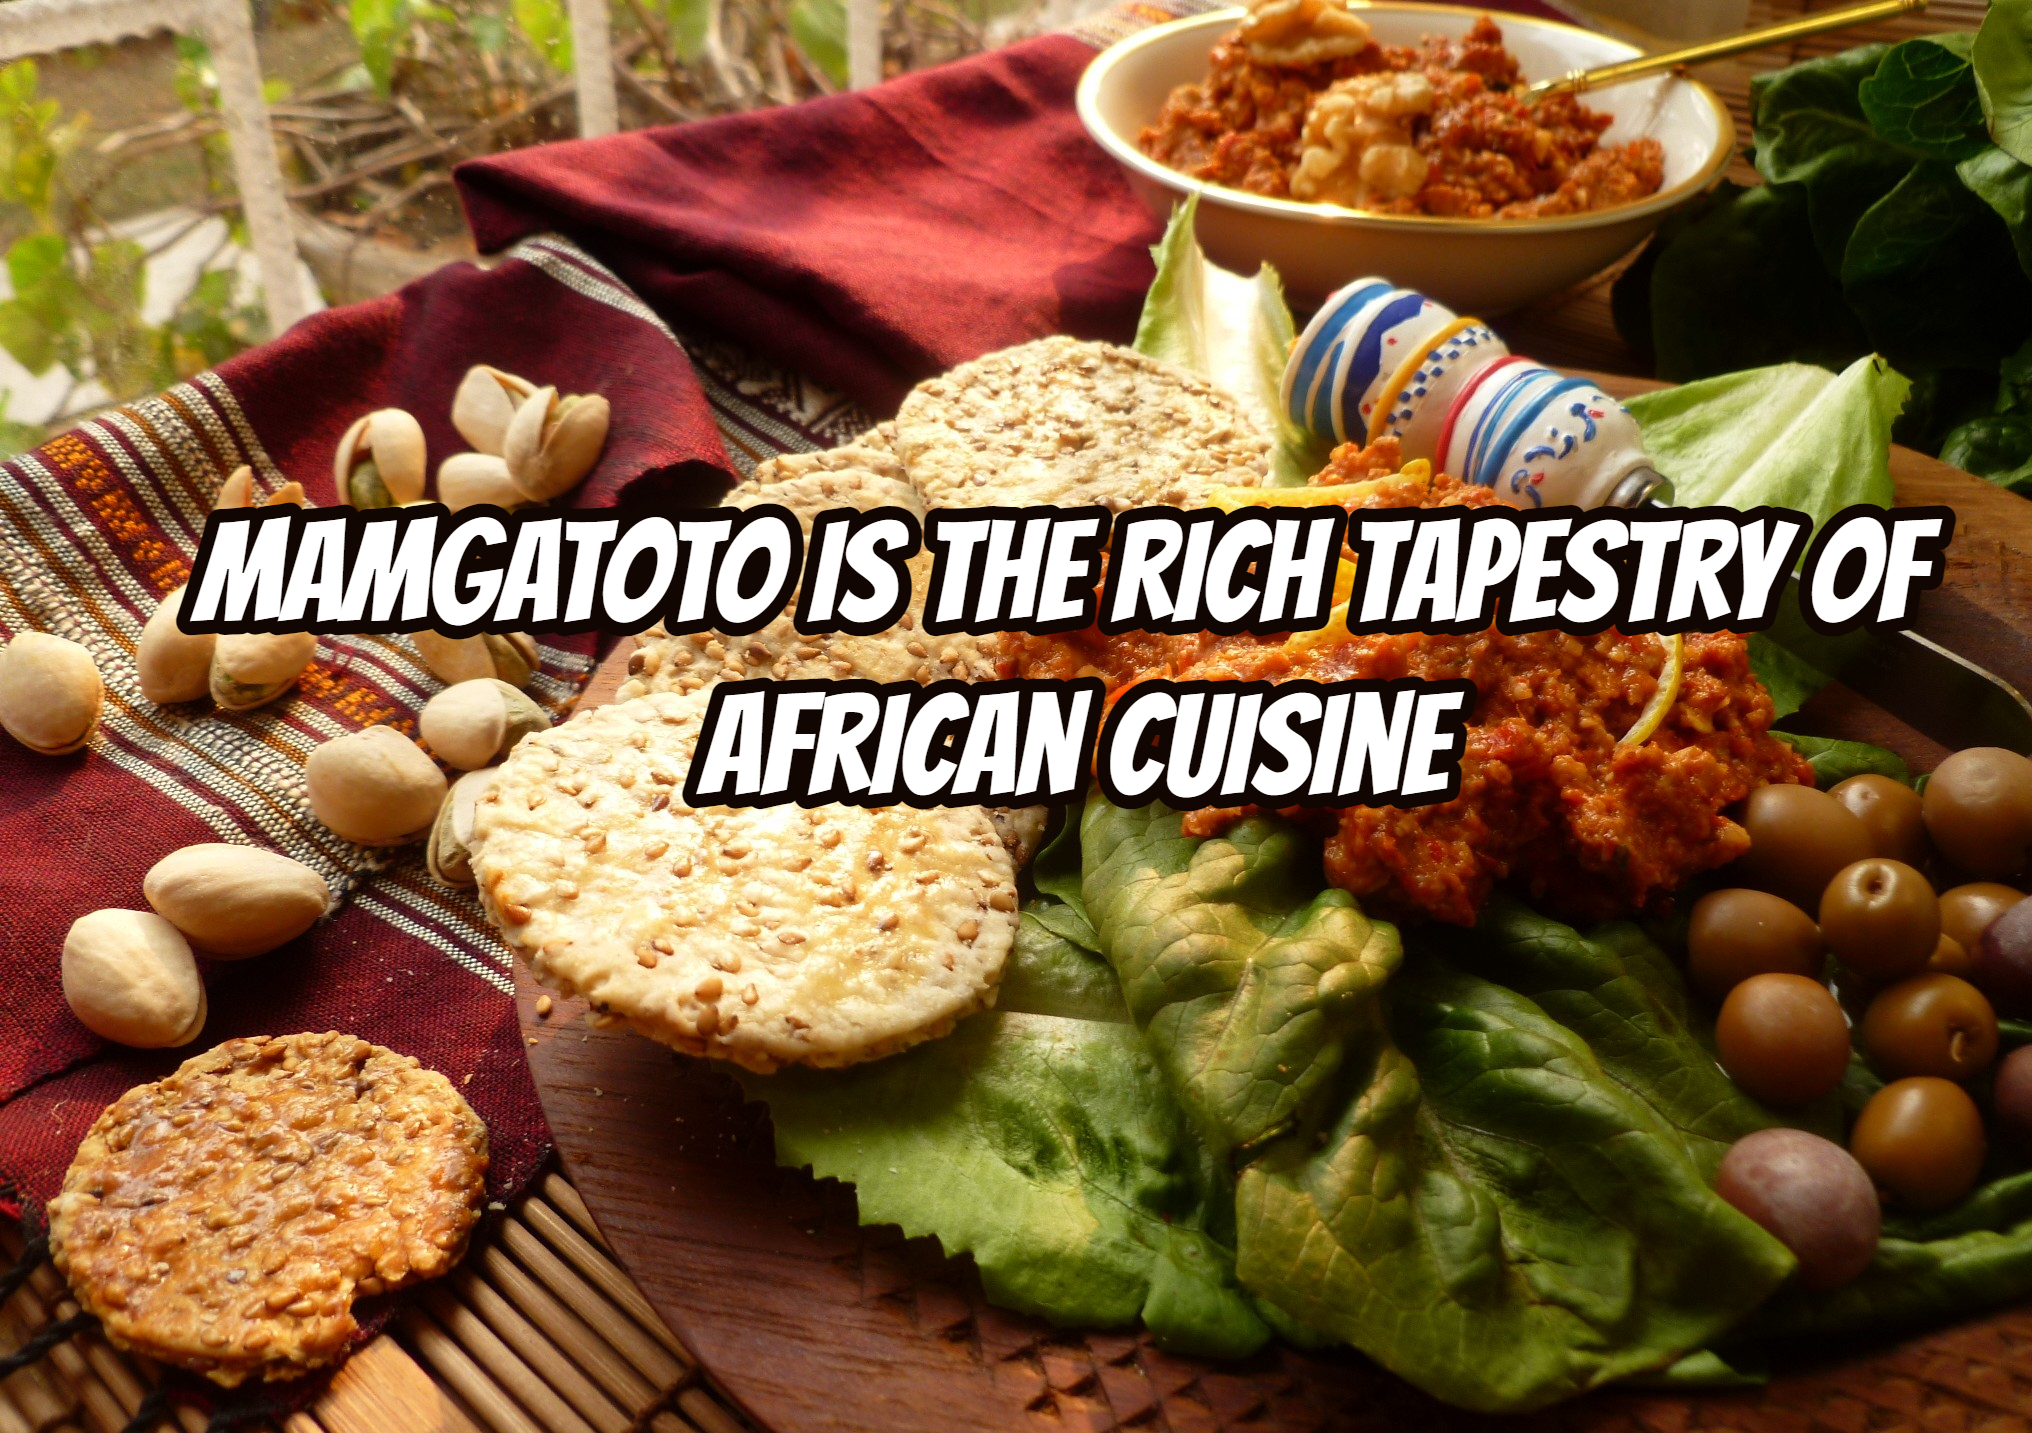 Mamgatoto is the Rich Tapestry of African Cuisine